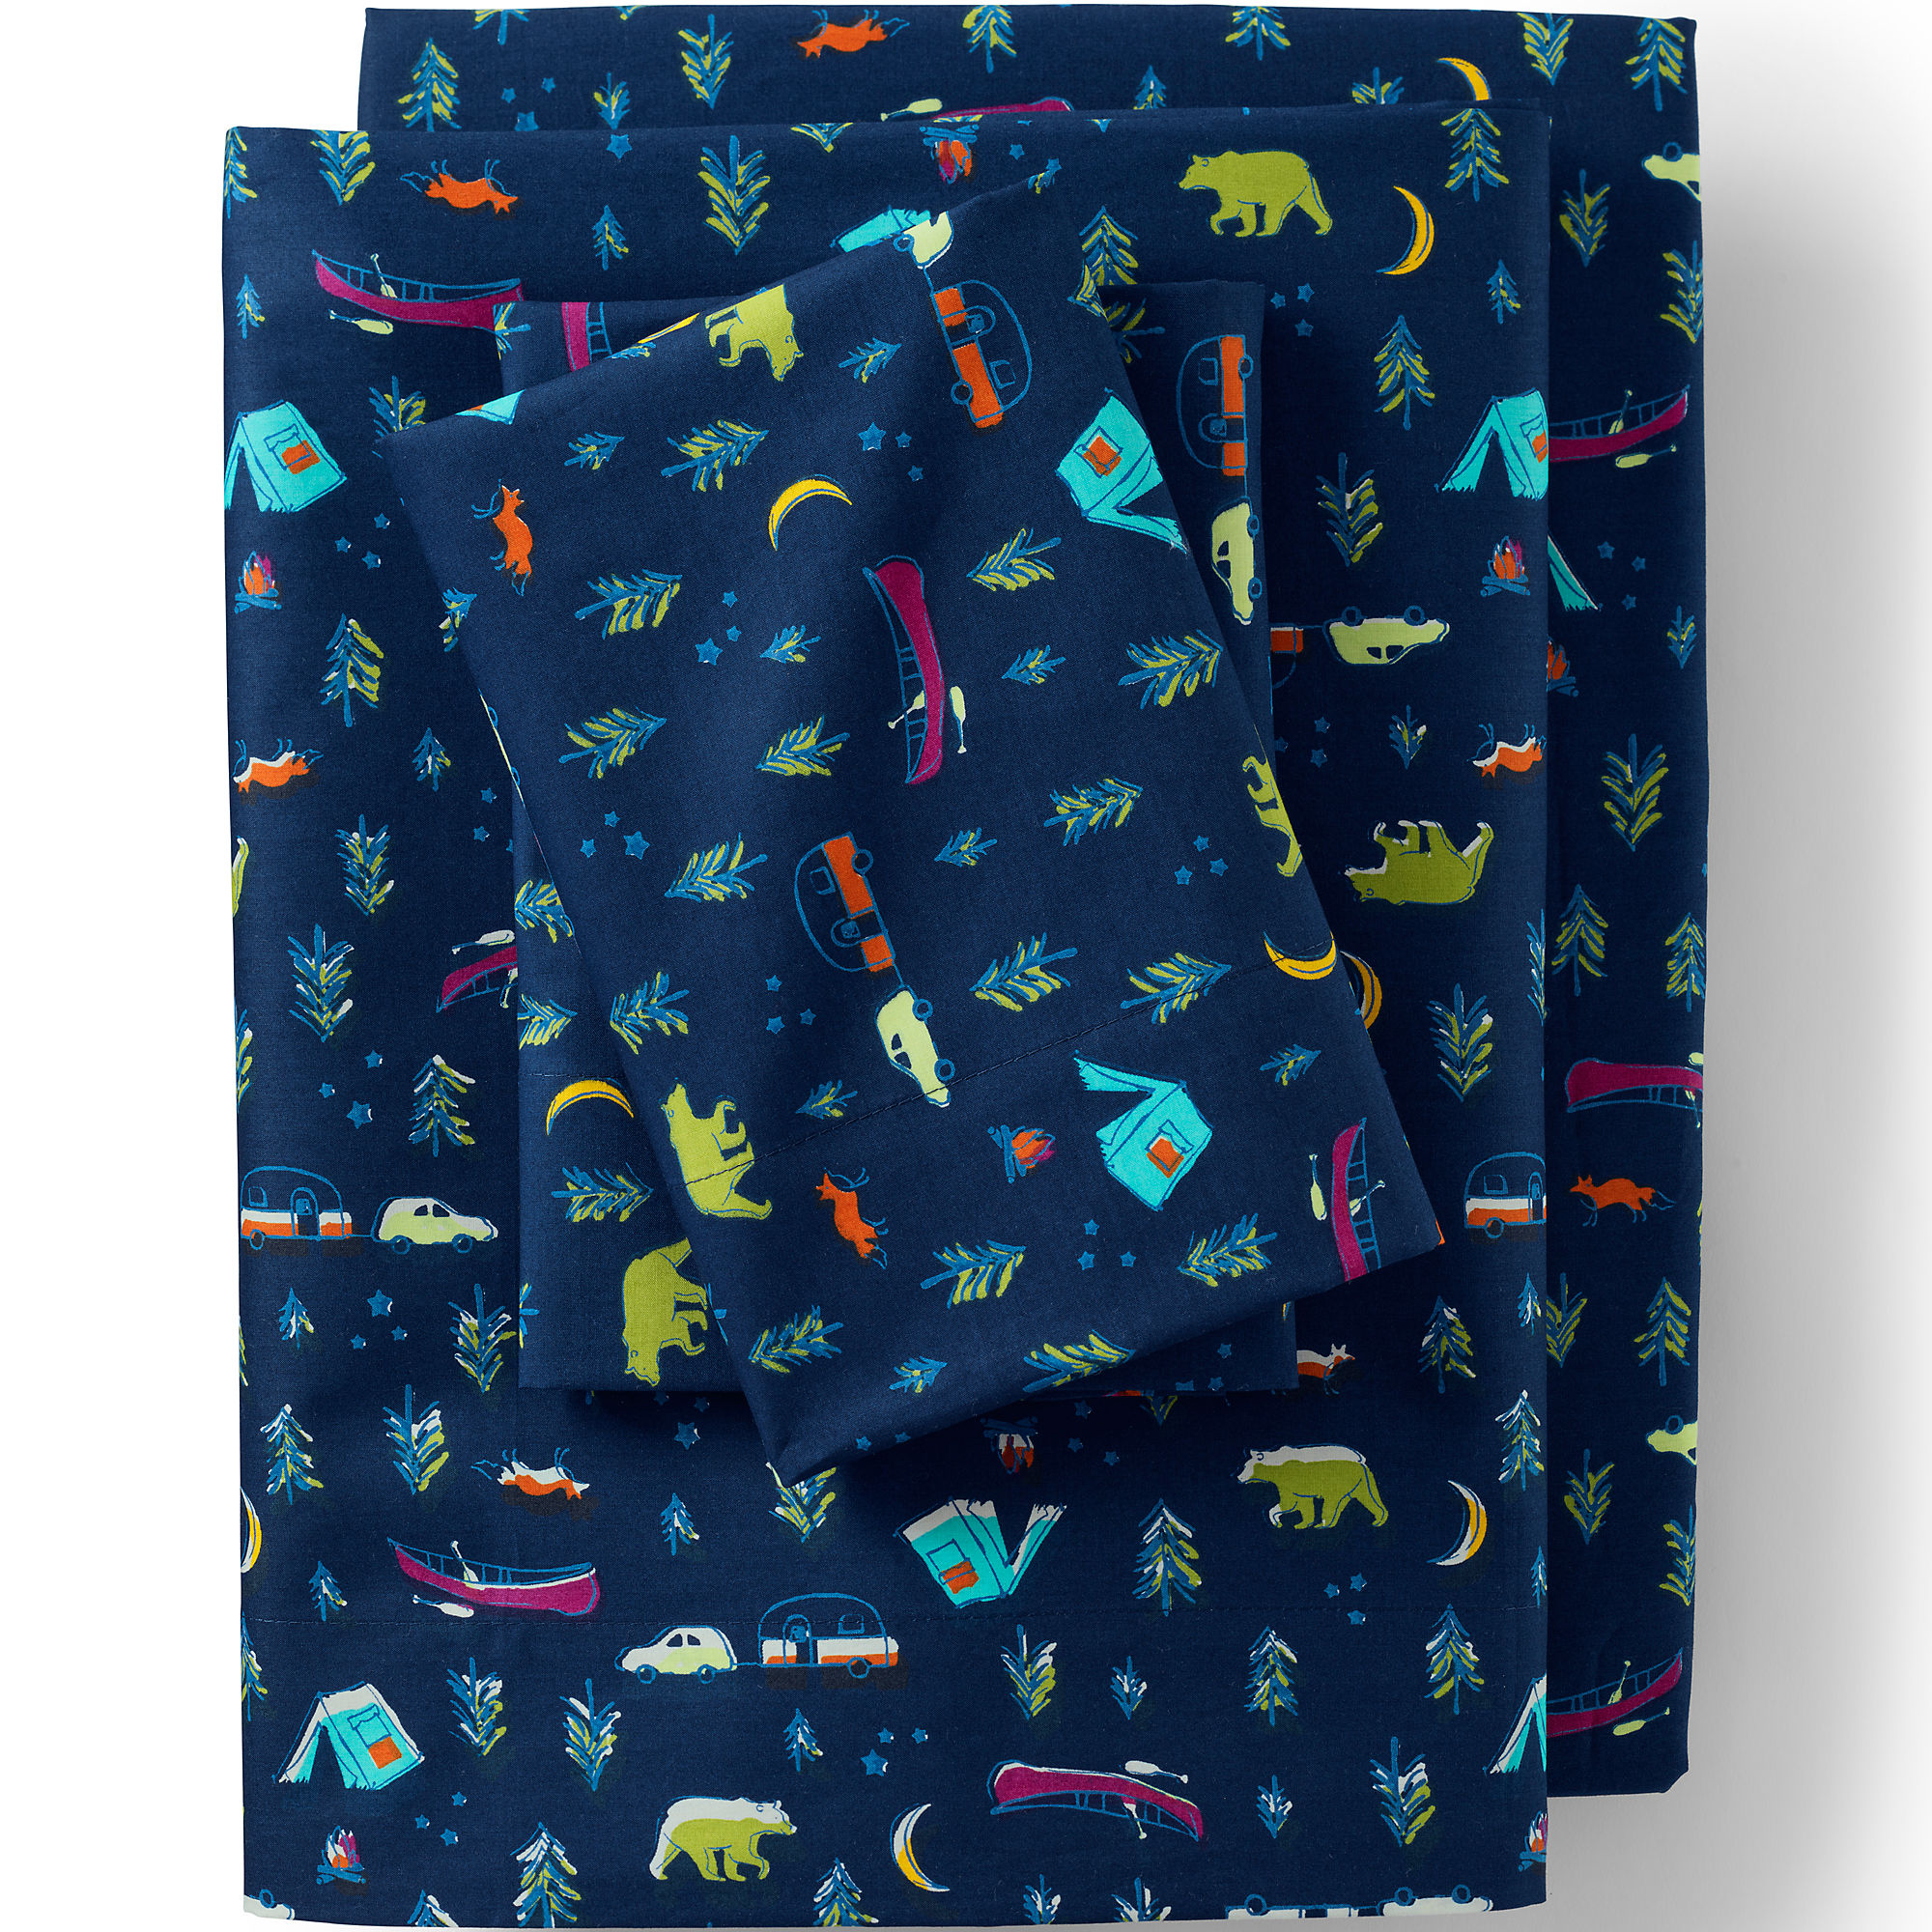 Lands End Kids Cotton Percale Printed Sheet Set 180 Thread Count